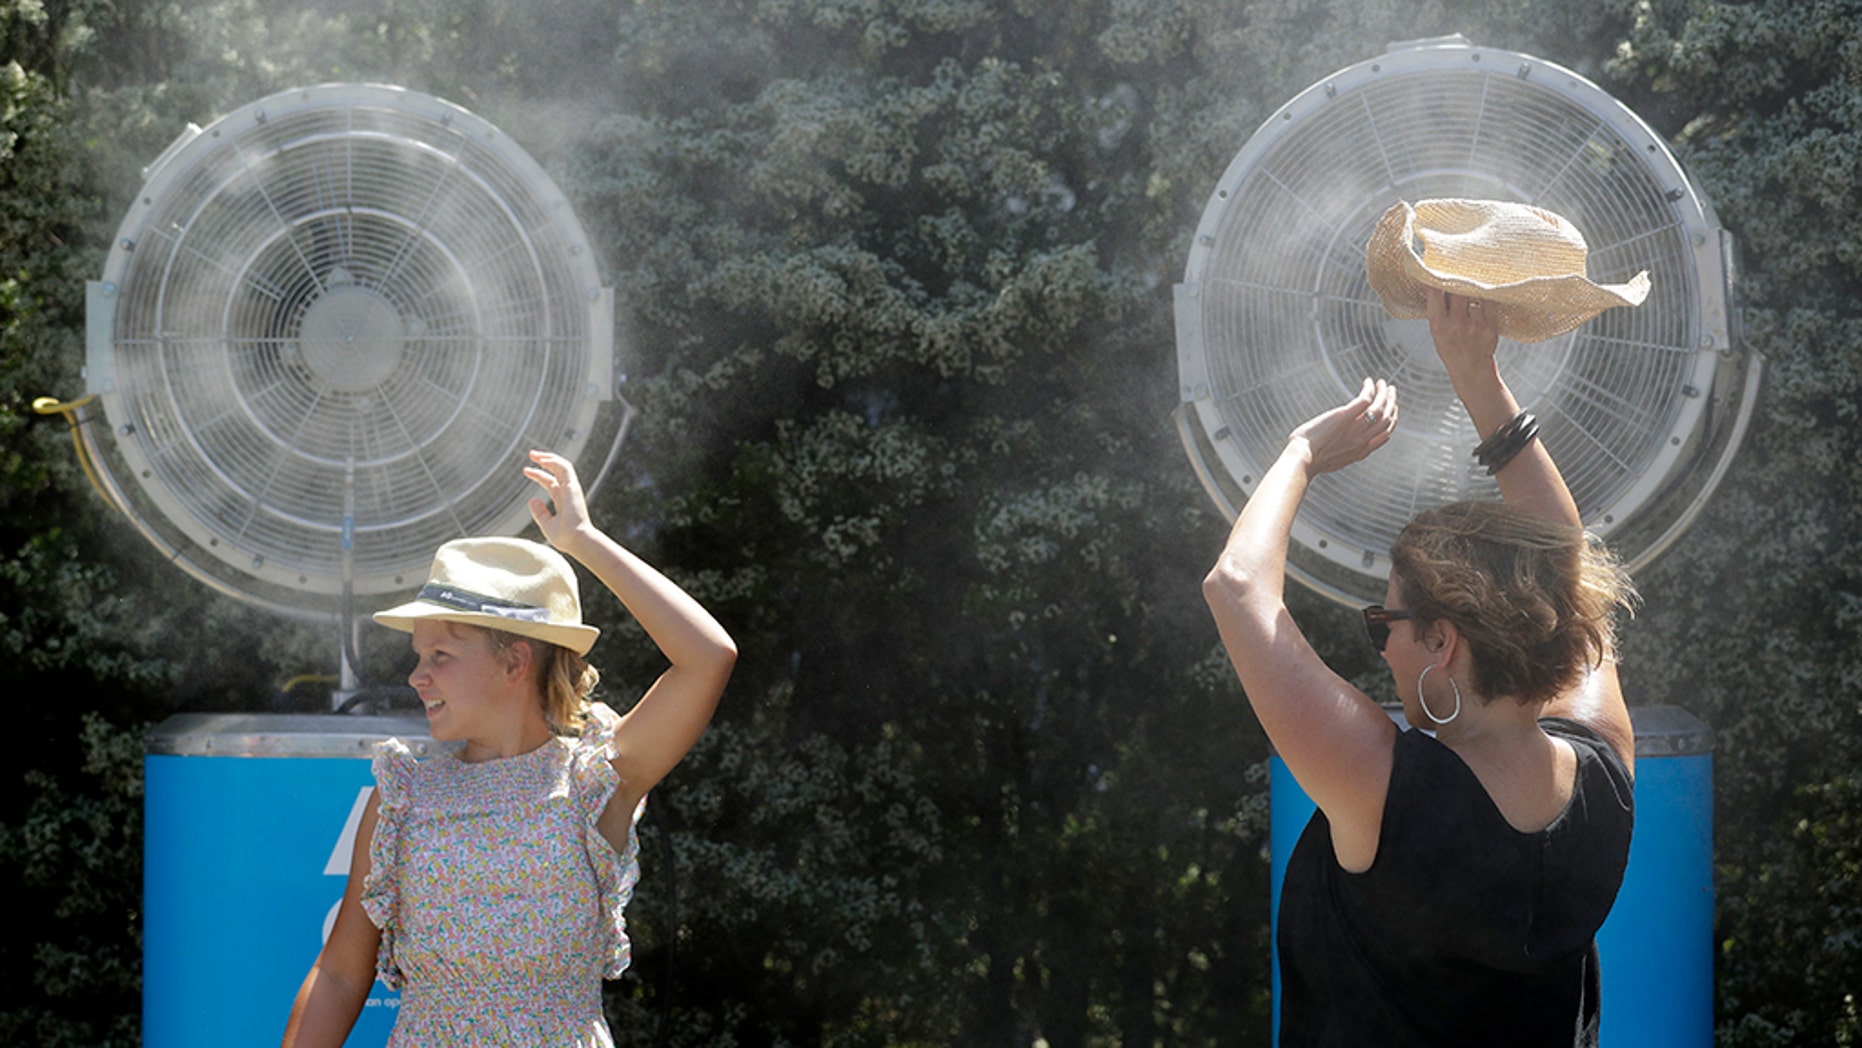 Australia records four of the hottest days on record in past 10 days as it struggles with heatwave